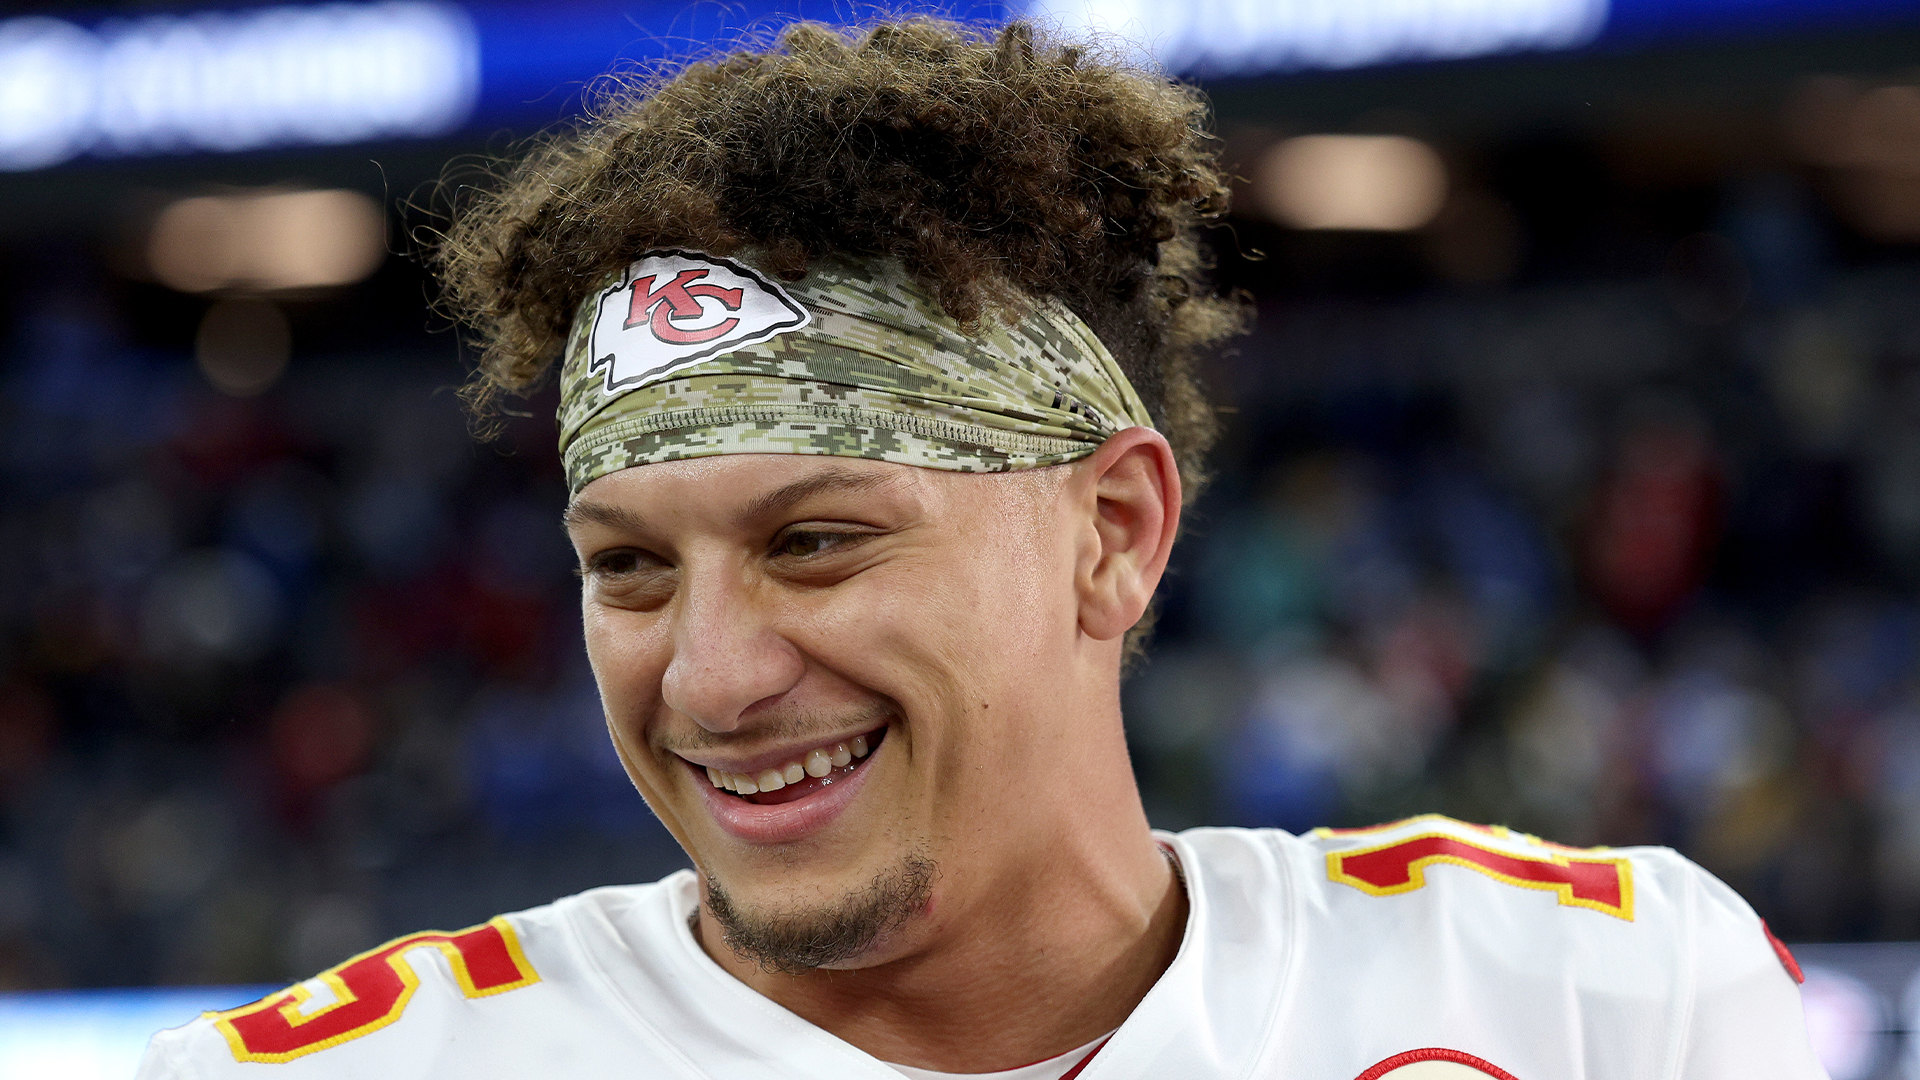 Patrick Mahomes' Vision To Own 30 Whataburger Restaurants Underway As 6 Locations Are Open